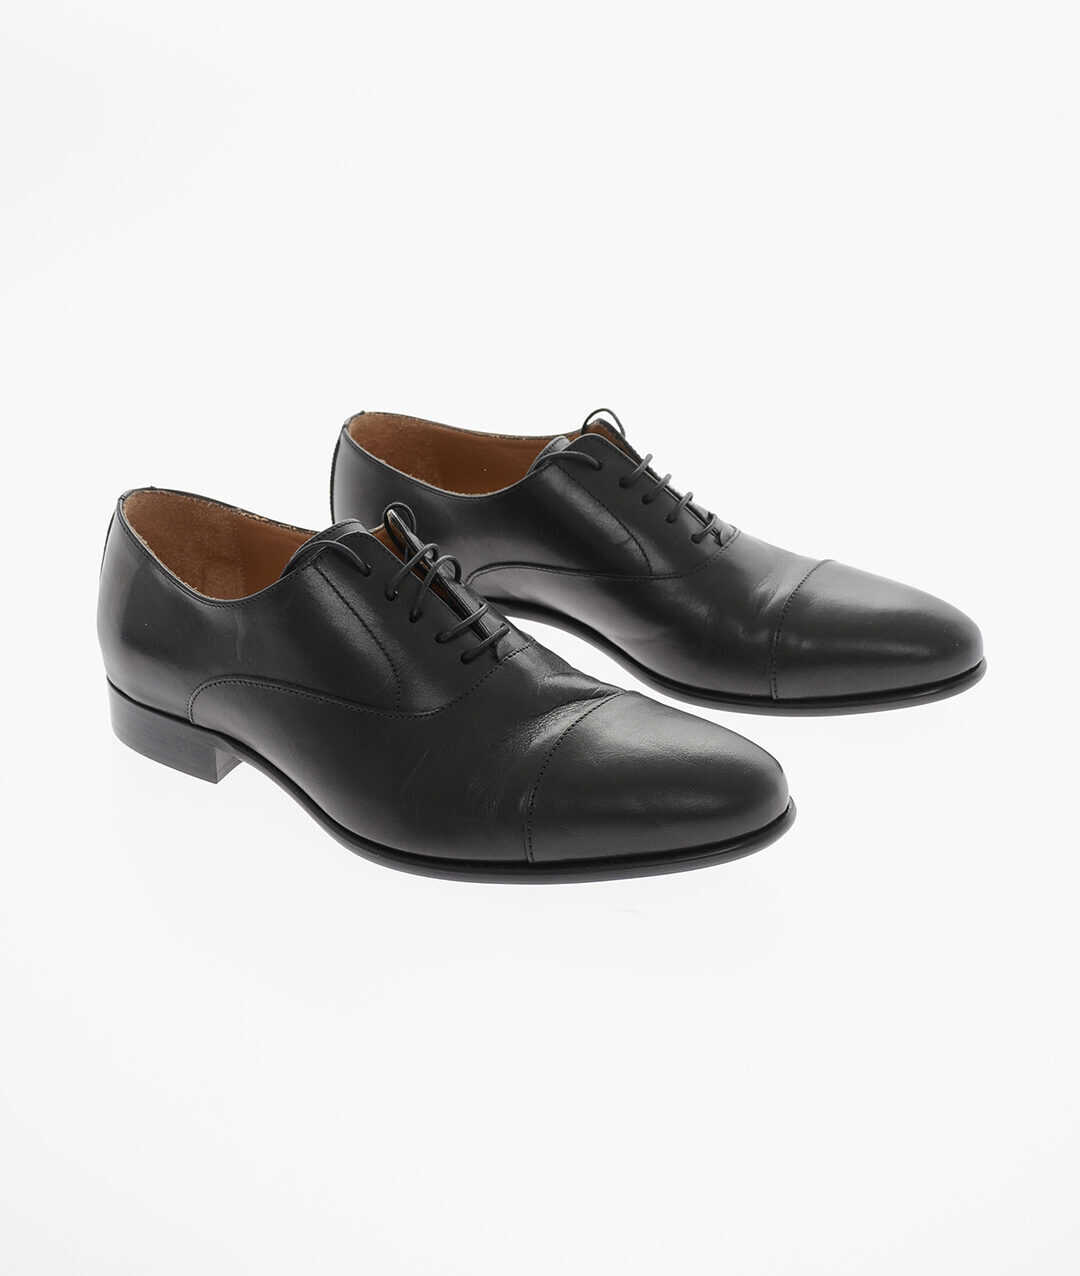 CORNELIANI Leather Oxford Shoes With Cuir Sole Black